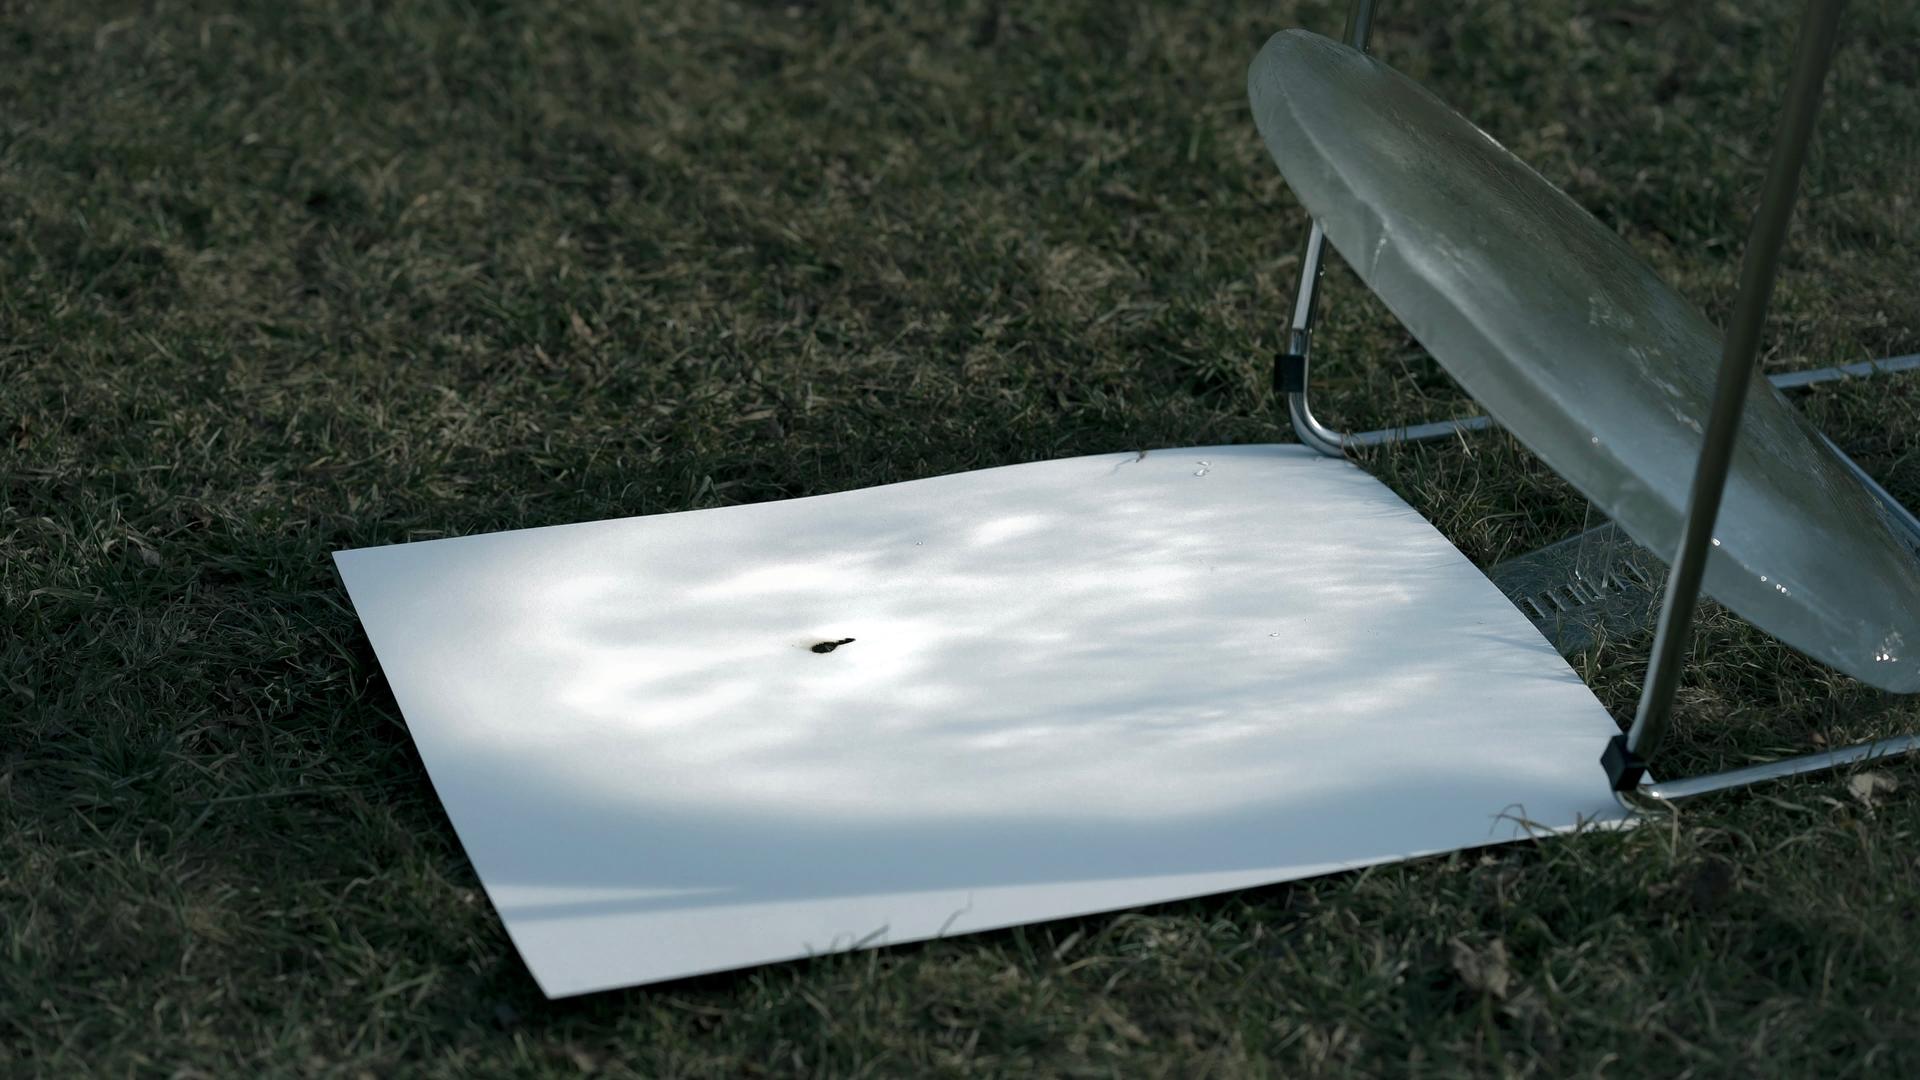 The ice lens burns the paper, the burn mark expanding as the sun moves.